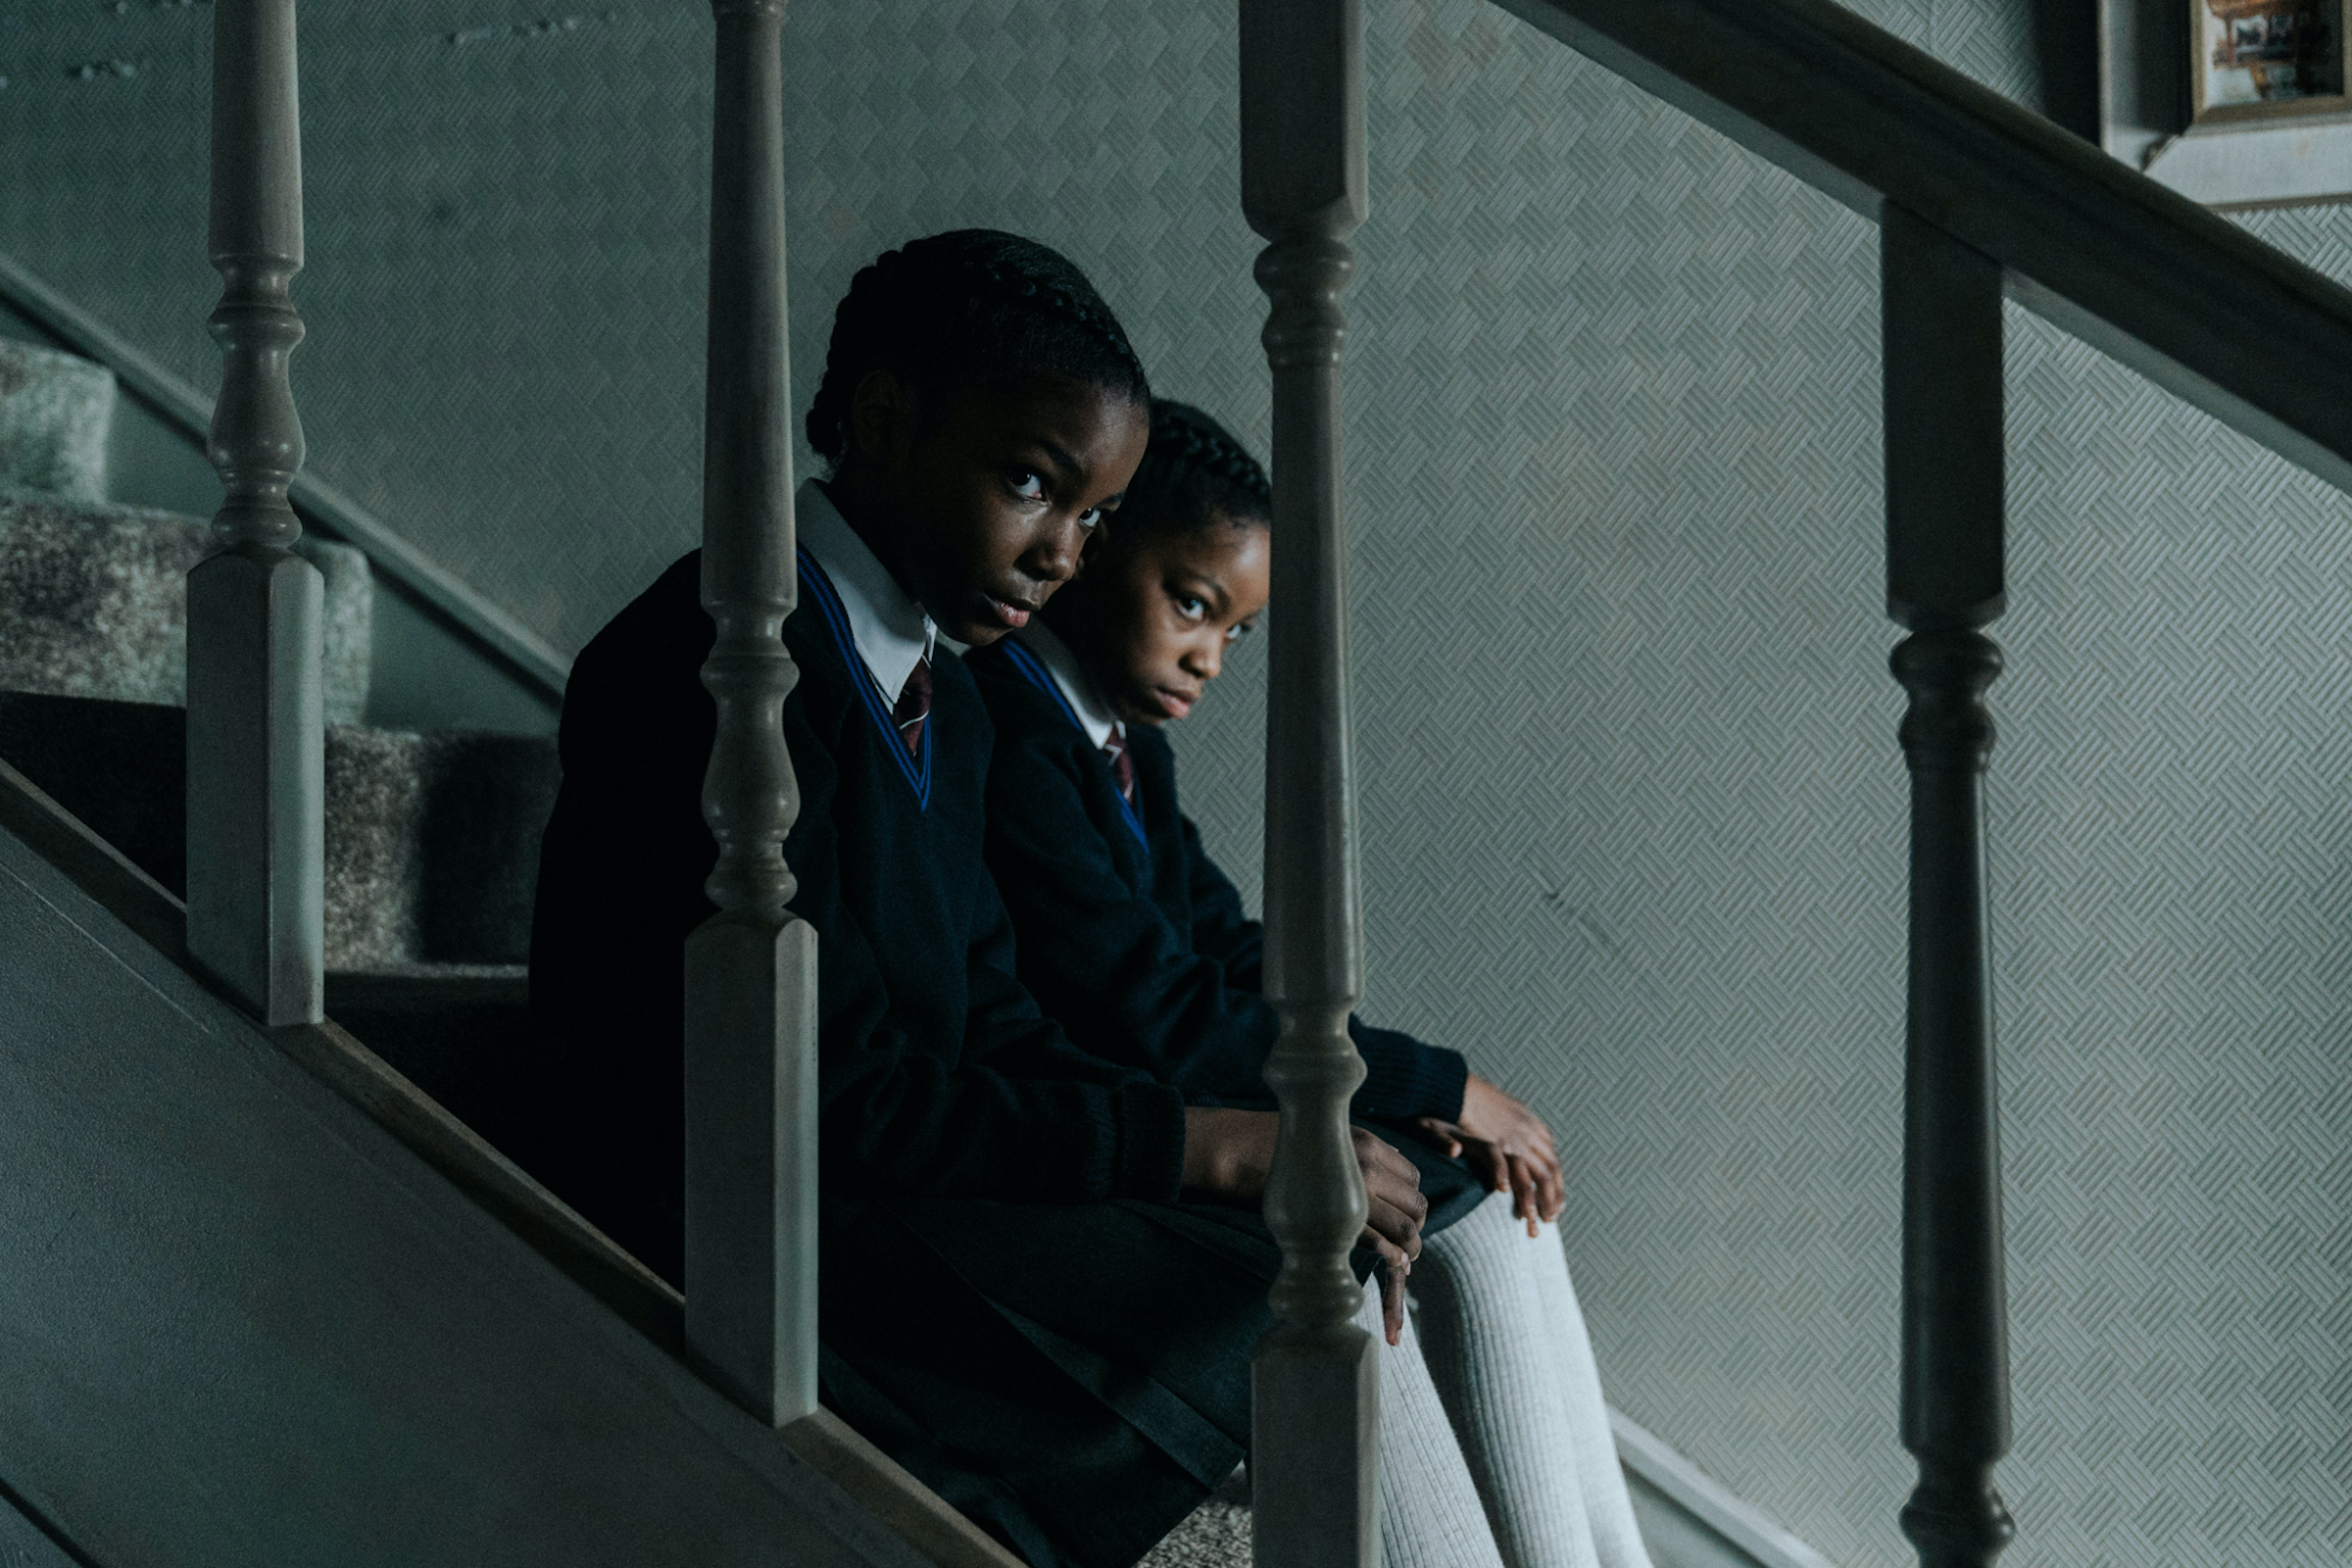 Leah Mondesir Simmons as young June Gibbons and Eva-Arianna Baxter as young Jennifer Gibbons sit on the stairs, peering out through the bannisters.